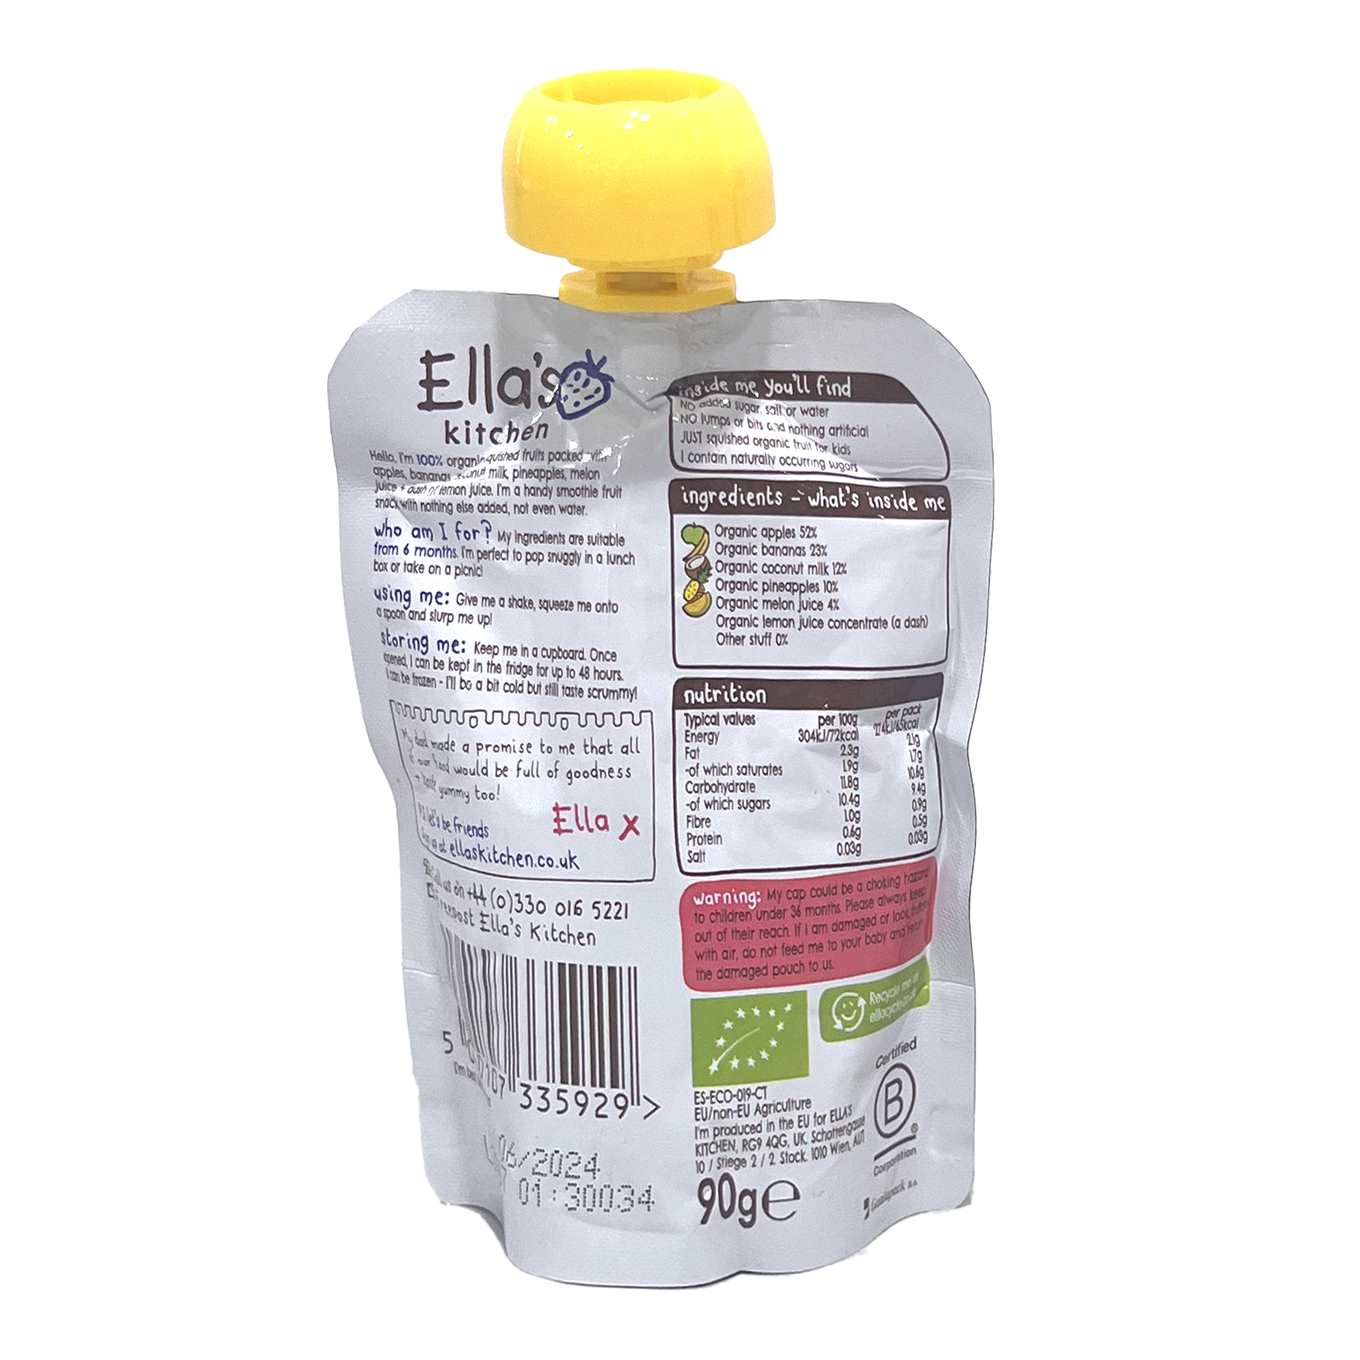 Buy Ella's Kitchen, The White one puree for babies - 90g in India at uyyaala.com